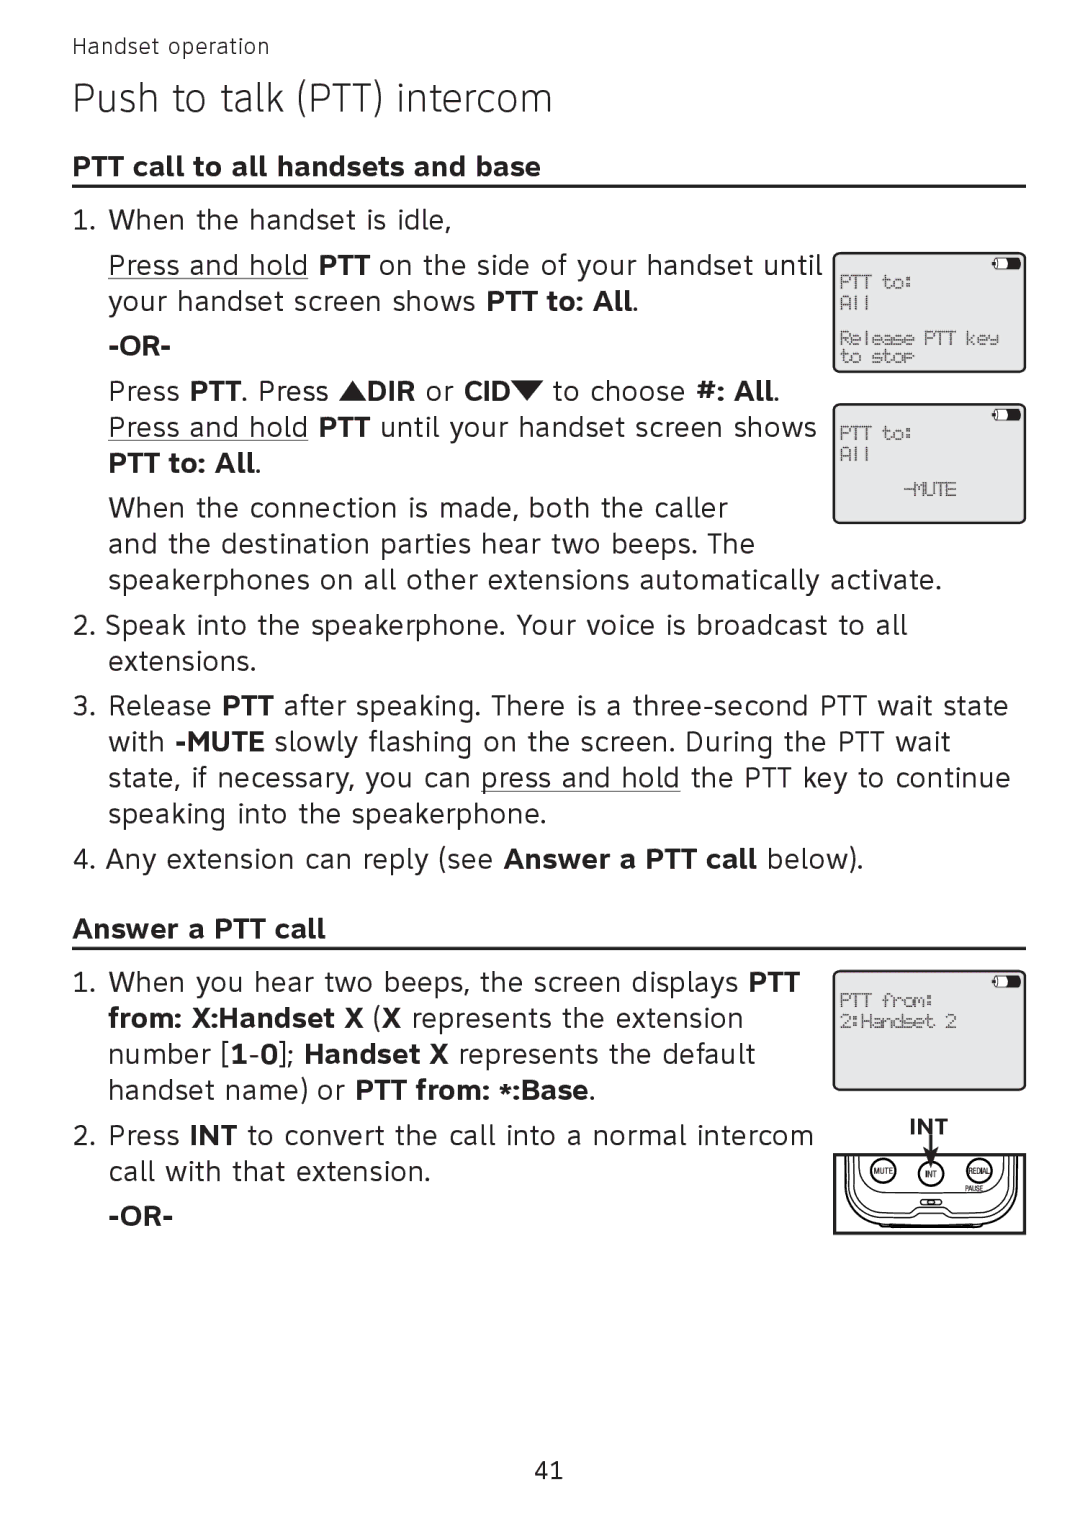 AT&T SB67108 PTT call to all handsets and base, Press and hold PTT on the side of your handset until, PTT to All 